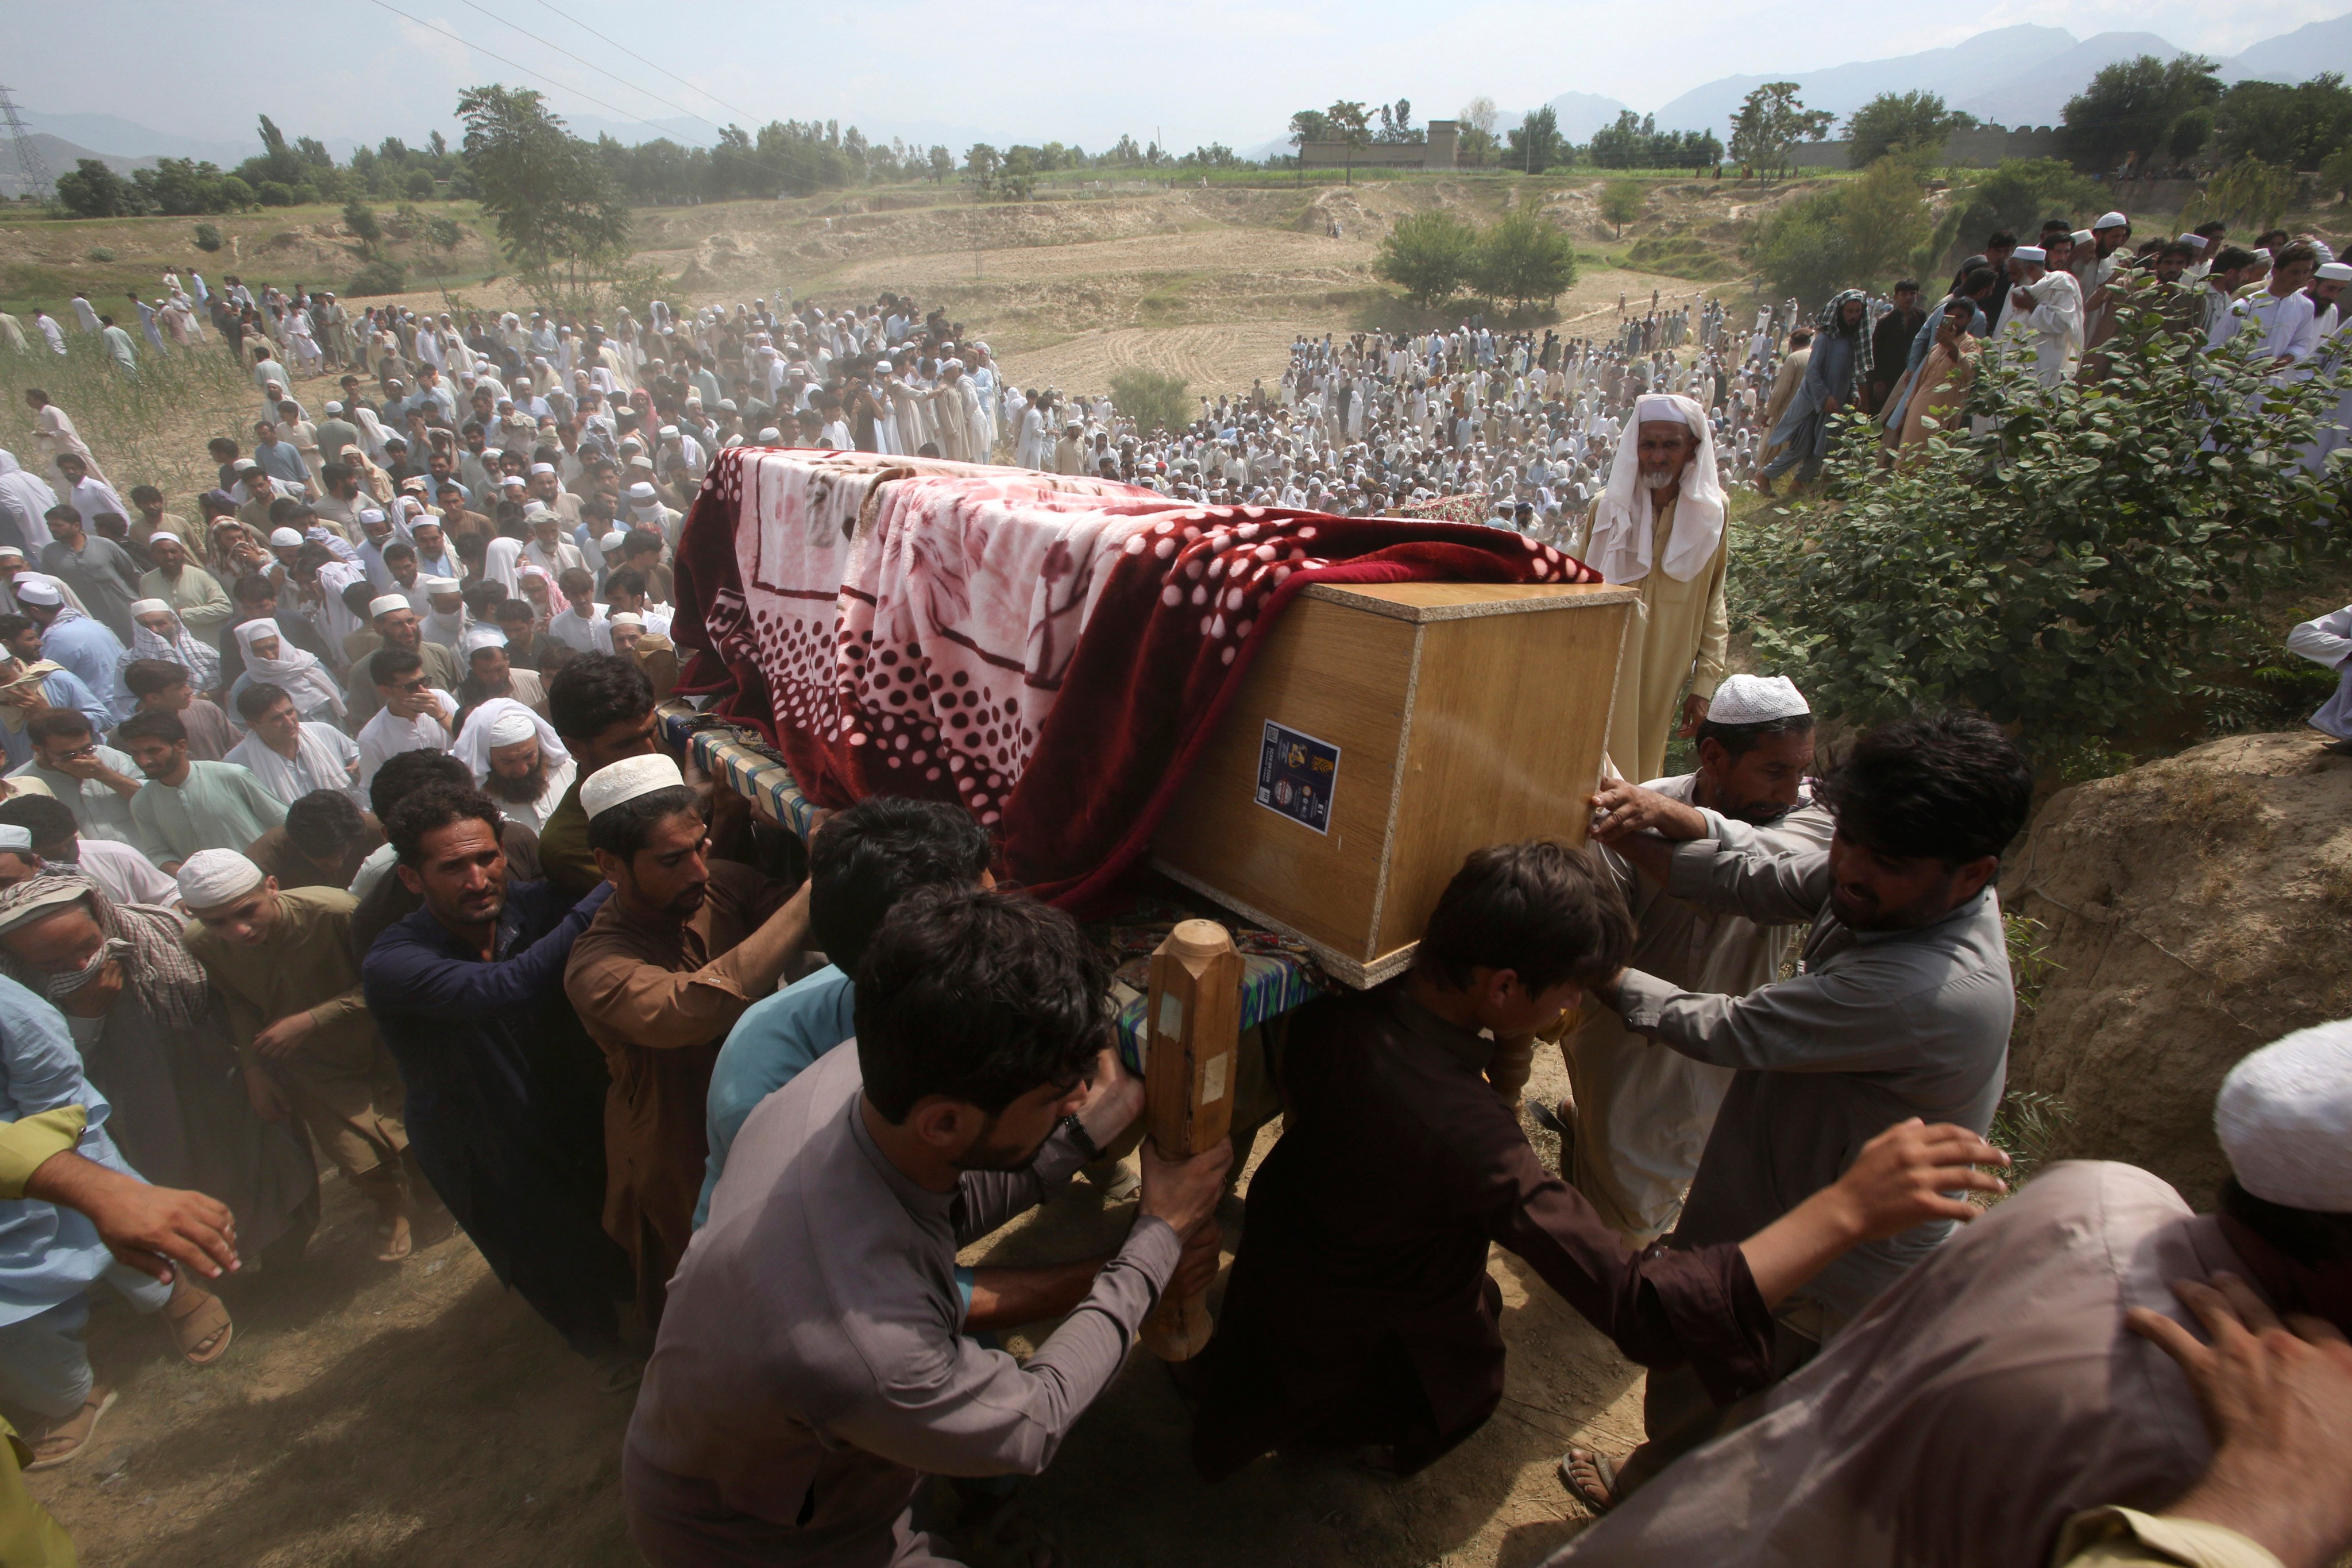 Mourners carry the casket of a victim of Sunday’s suicide bomb attack in the Bajur district of Khyber Pakhtunkhwa, Pakistan on Monday. Photo: AP